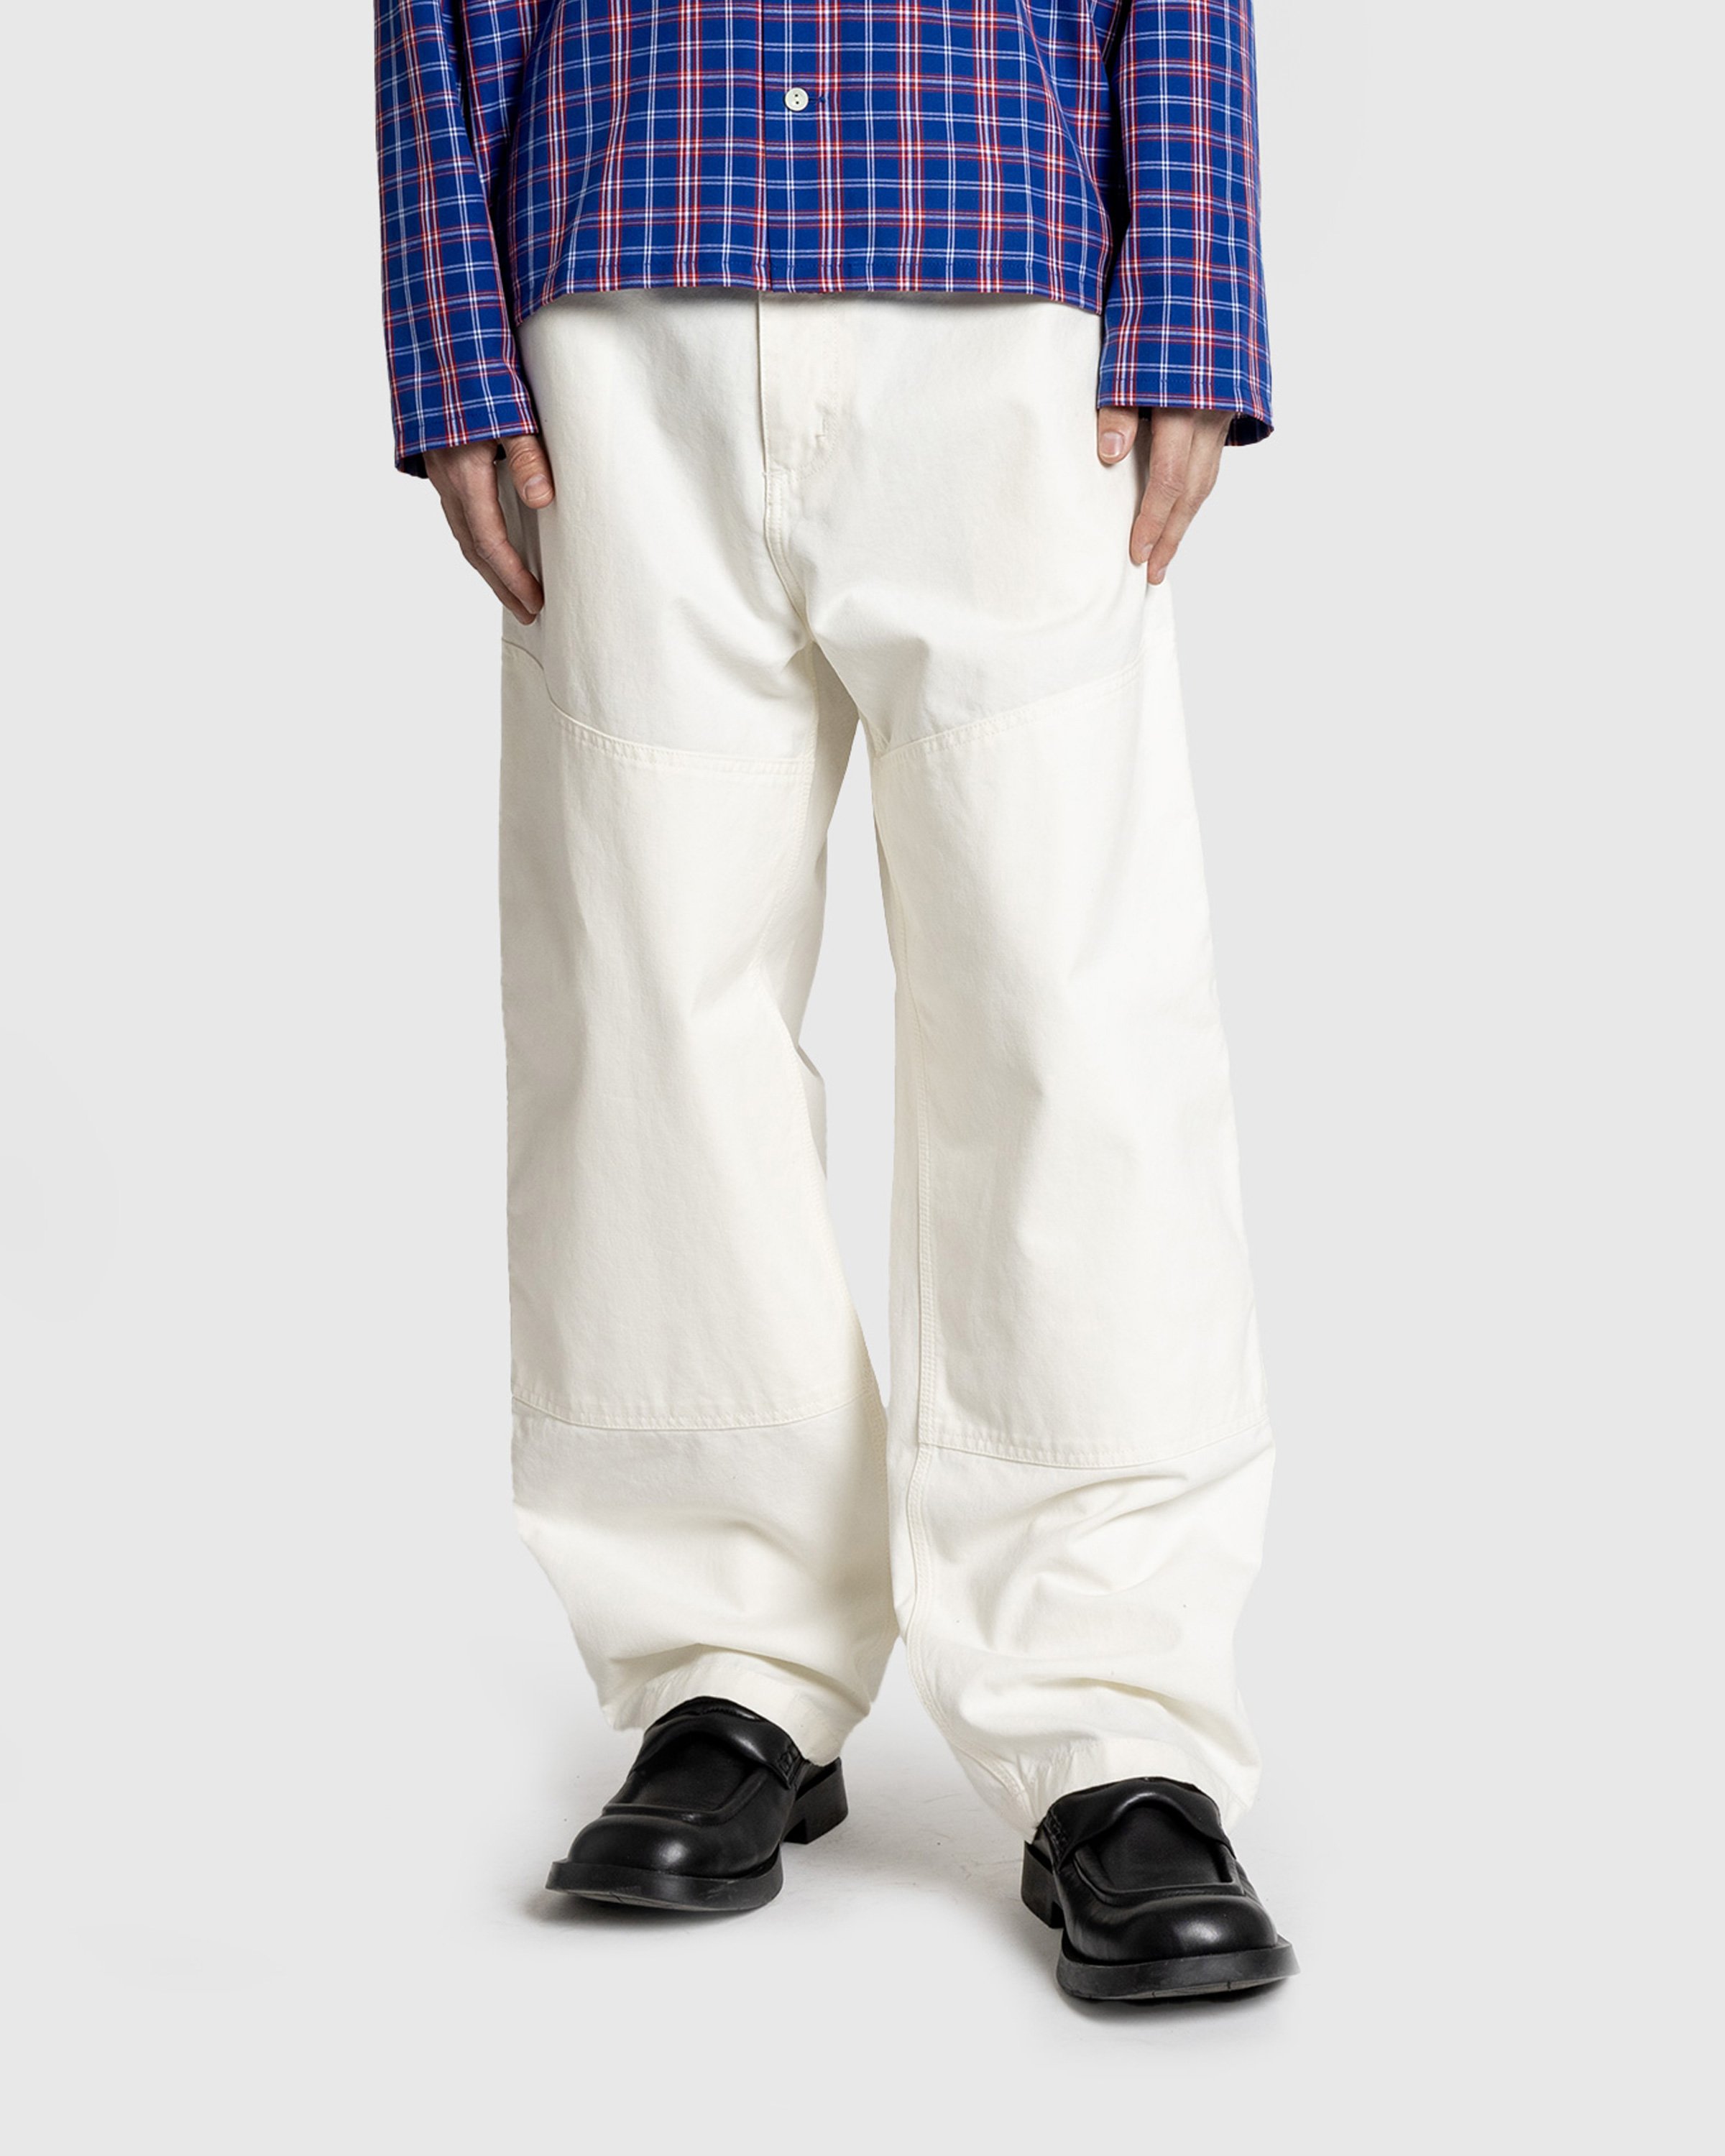 Carhartt WIP - Wide Panel Pant Wax /rinsed - Clothing - White - Image 2